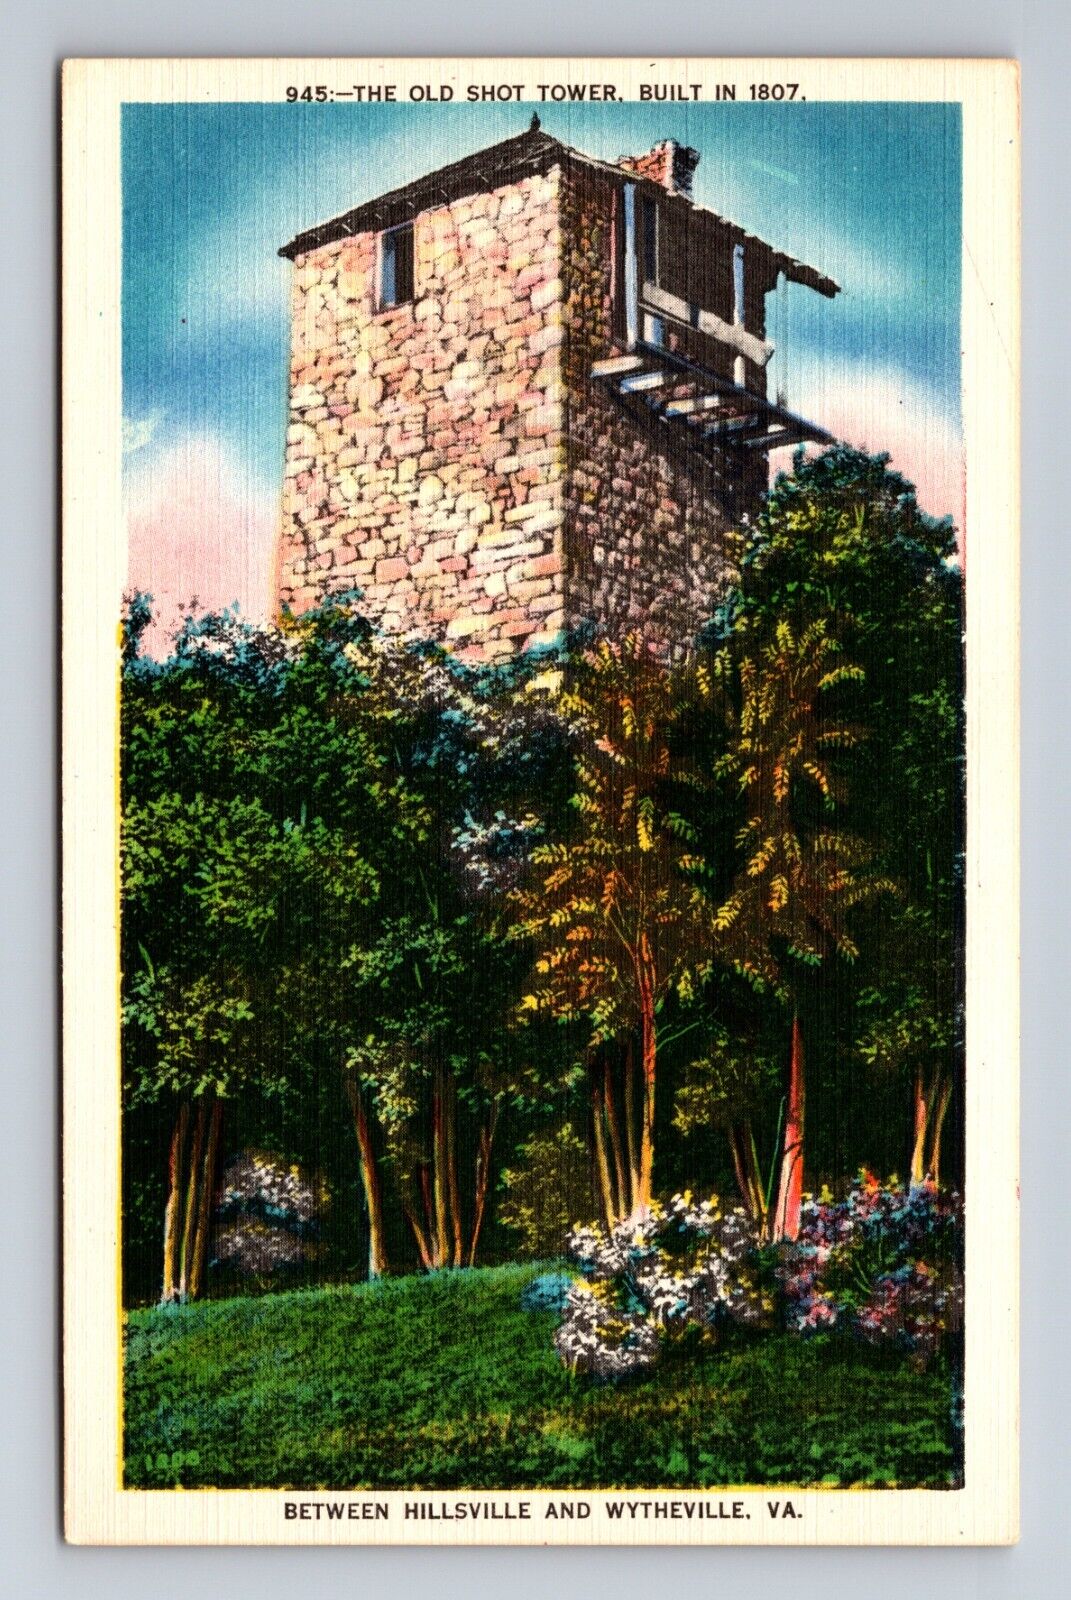 The Old Shot Tower Built 1807 Between Hillsville and Wytheville VA Postcard